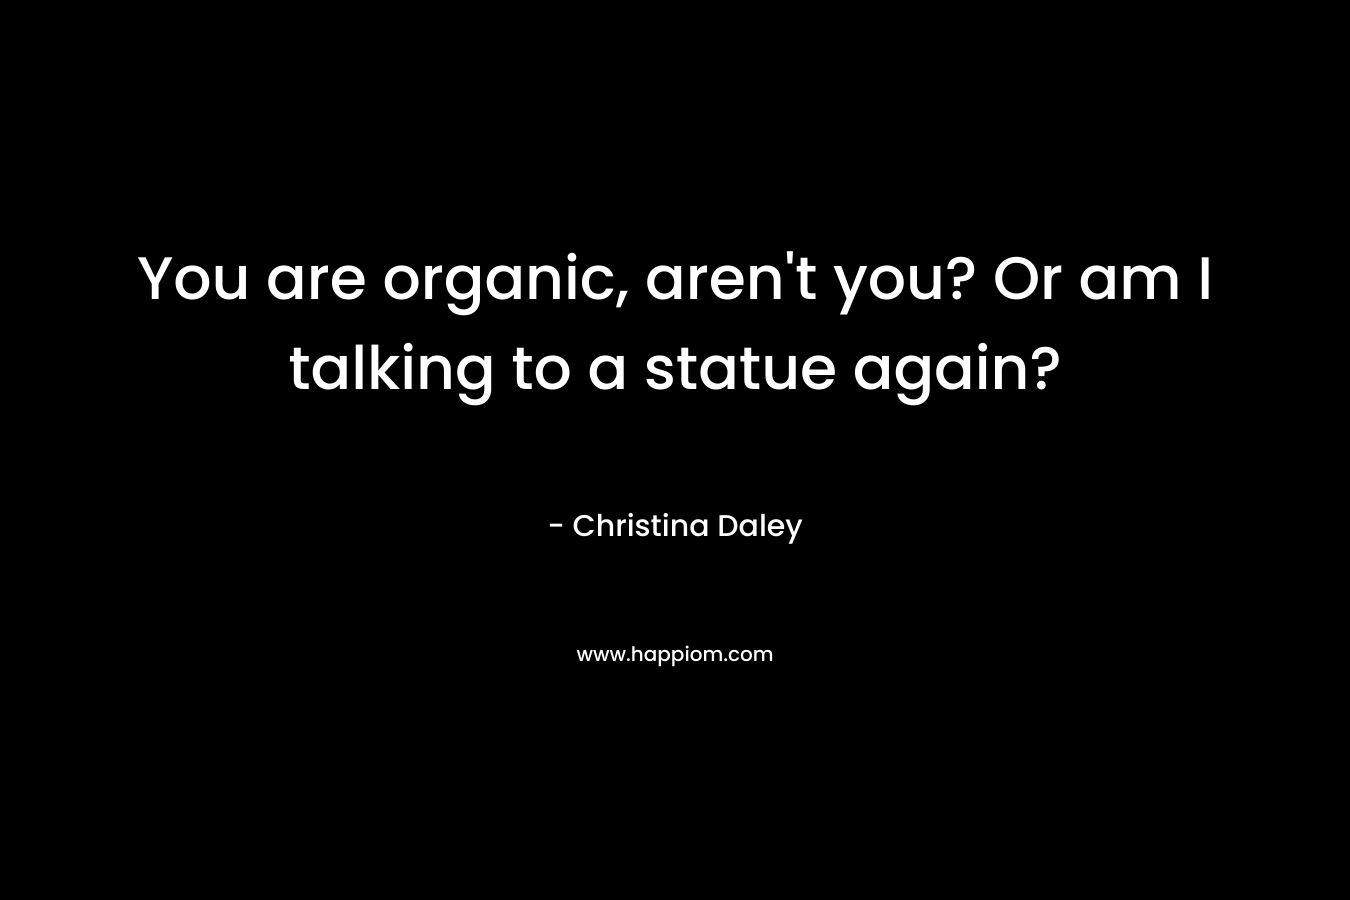 You are organic, aren't you? Or am I talking to a statue again?